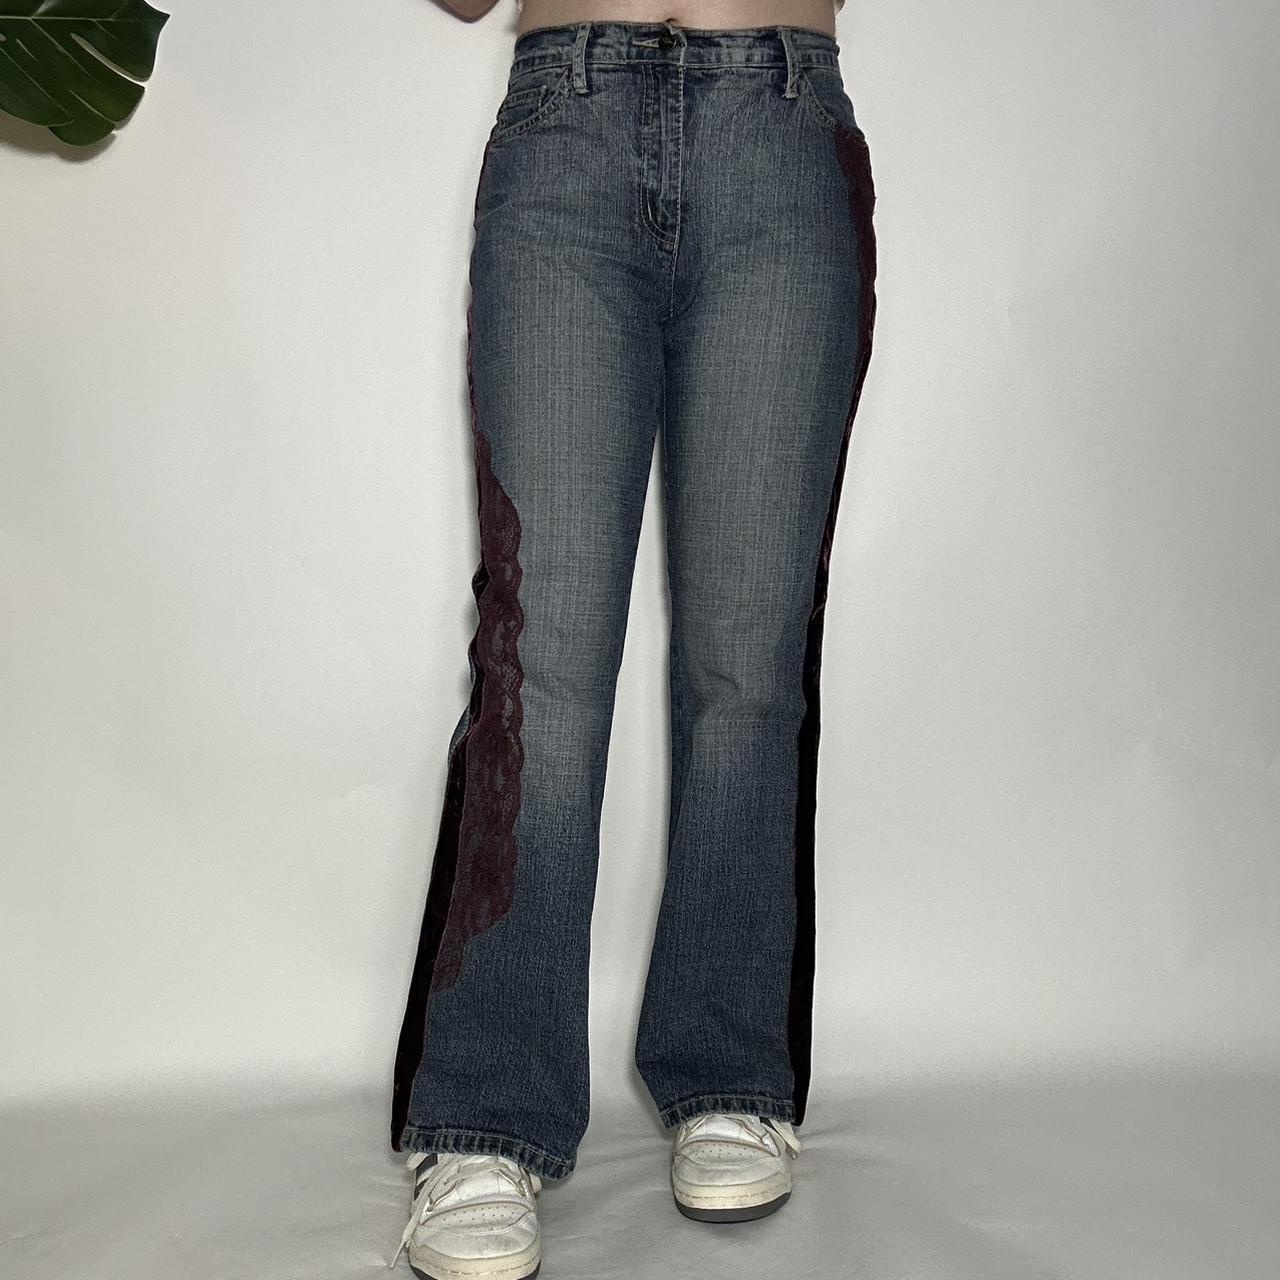 Vintage Y2k denim bootcut jeans with red velour stripe and lace detailing